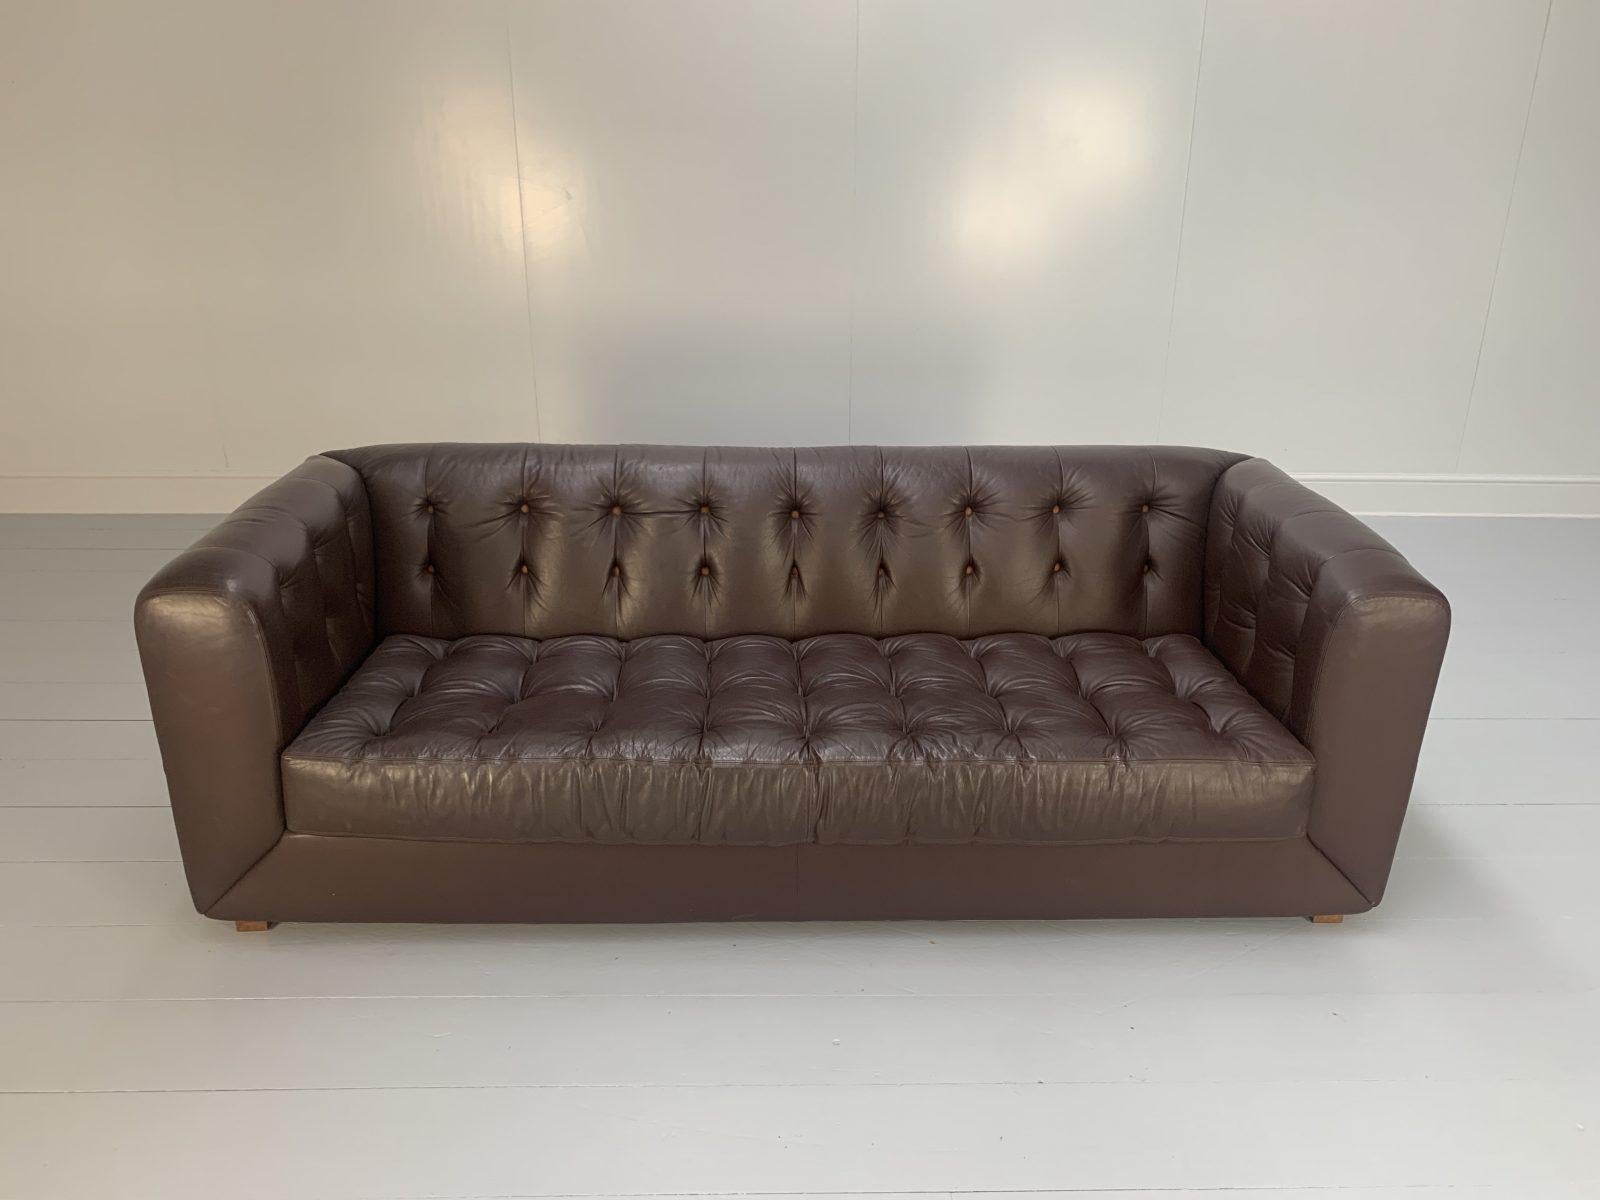 David Linley “Yoxford” Chesterfield 3-Seat Sofa in Brown Leather For Sale 1